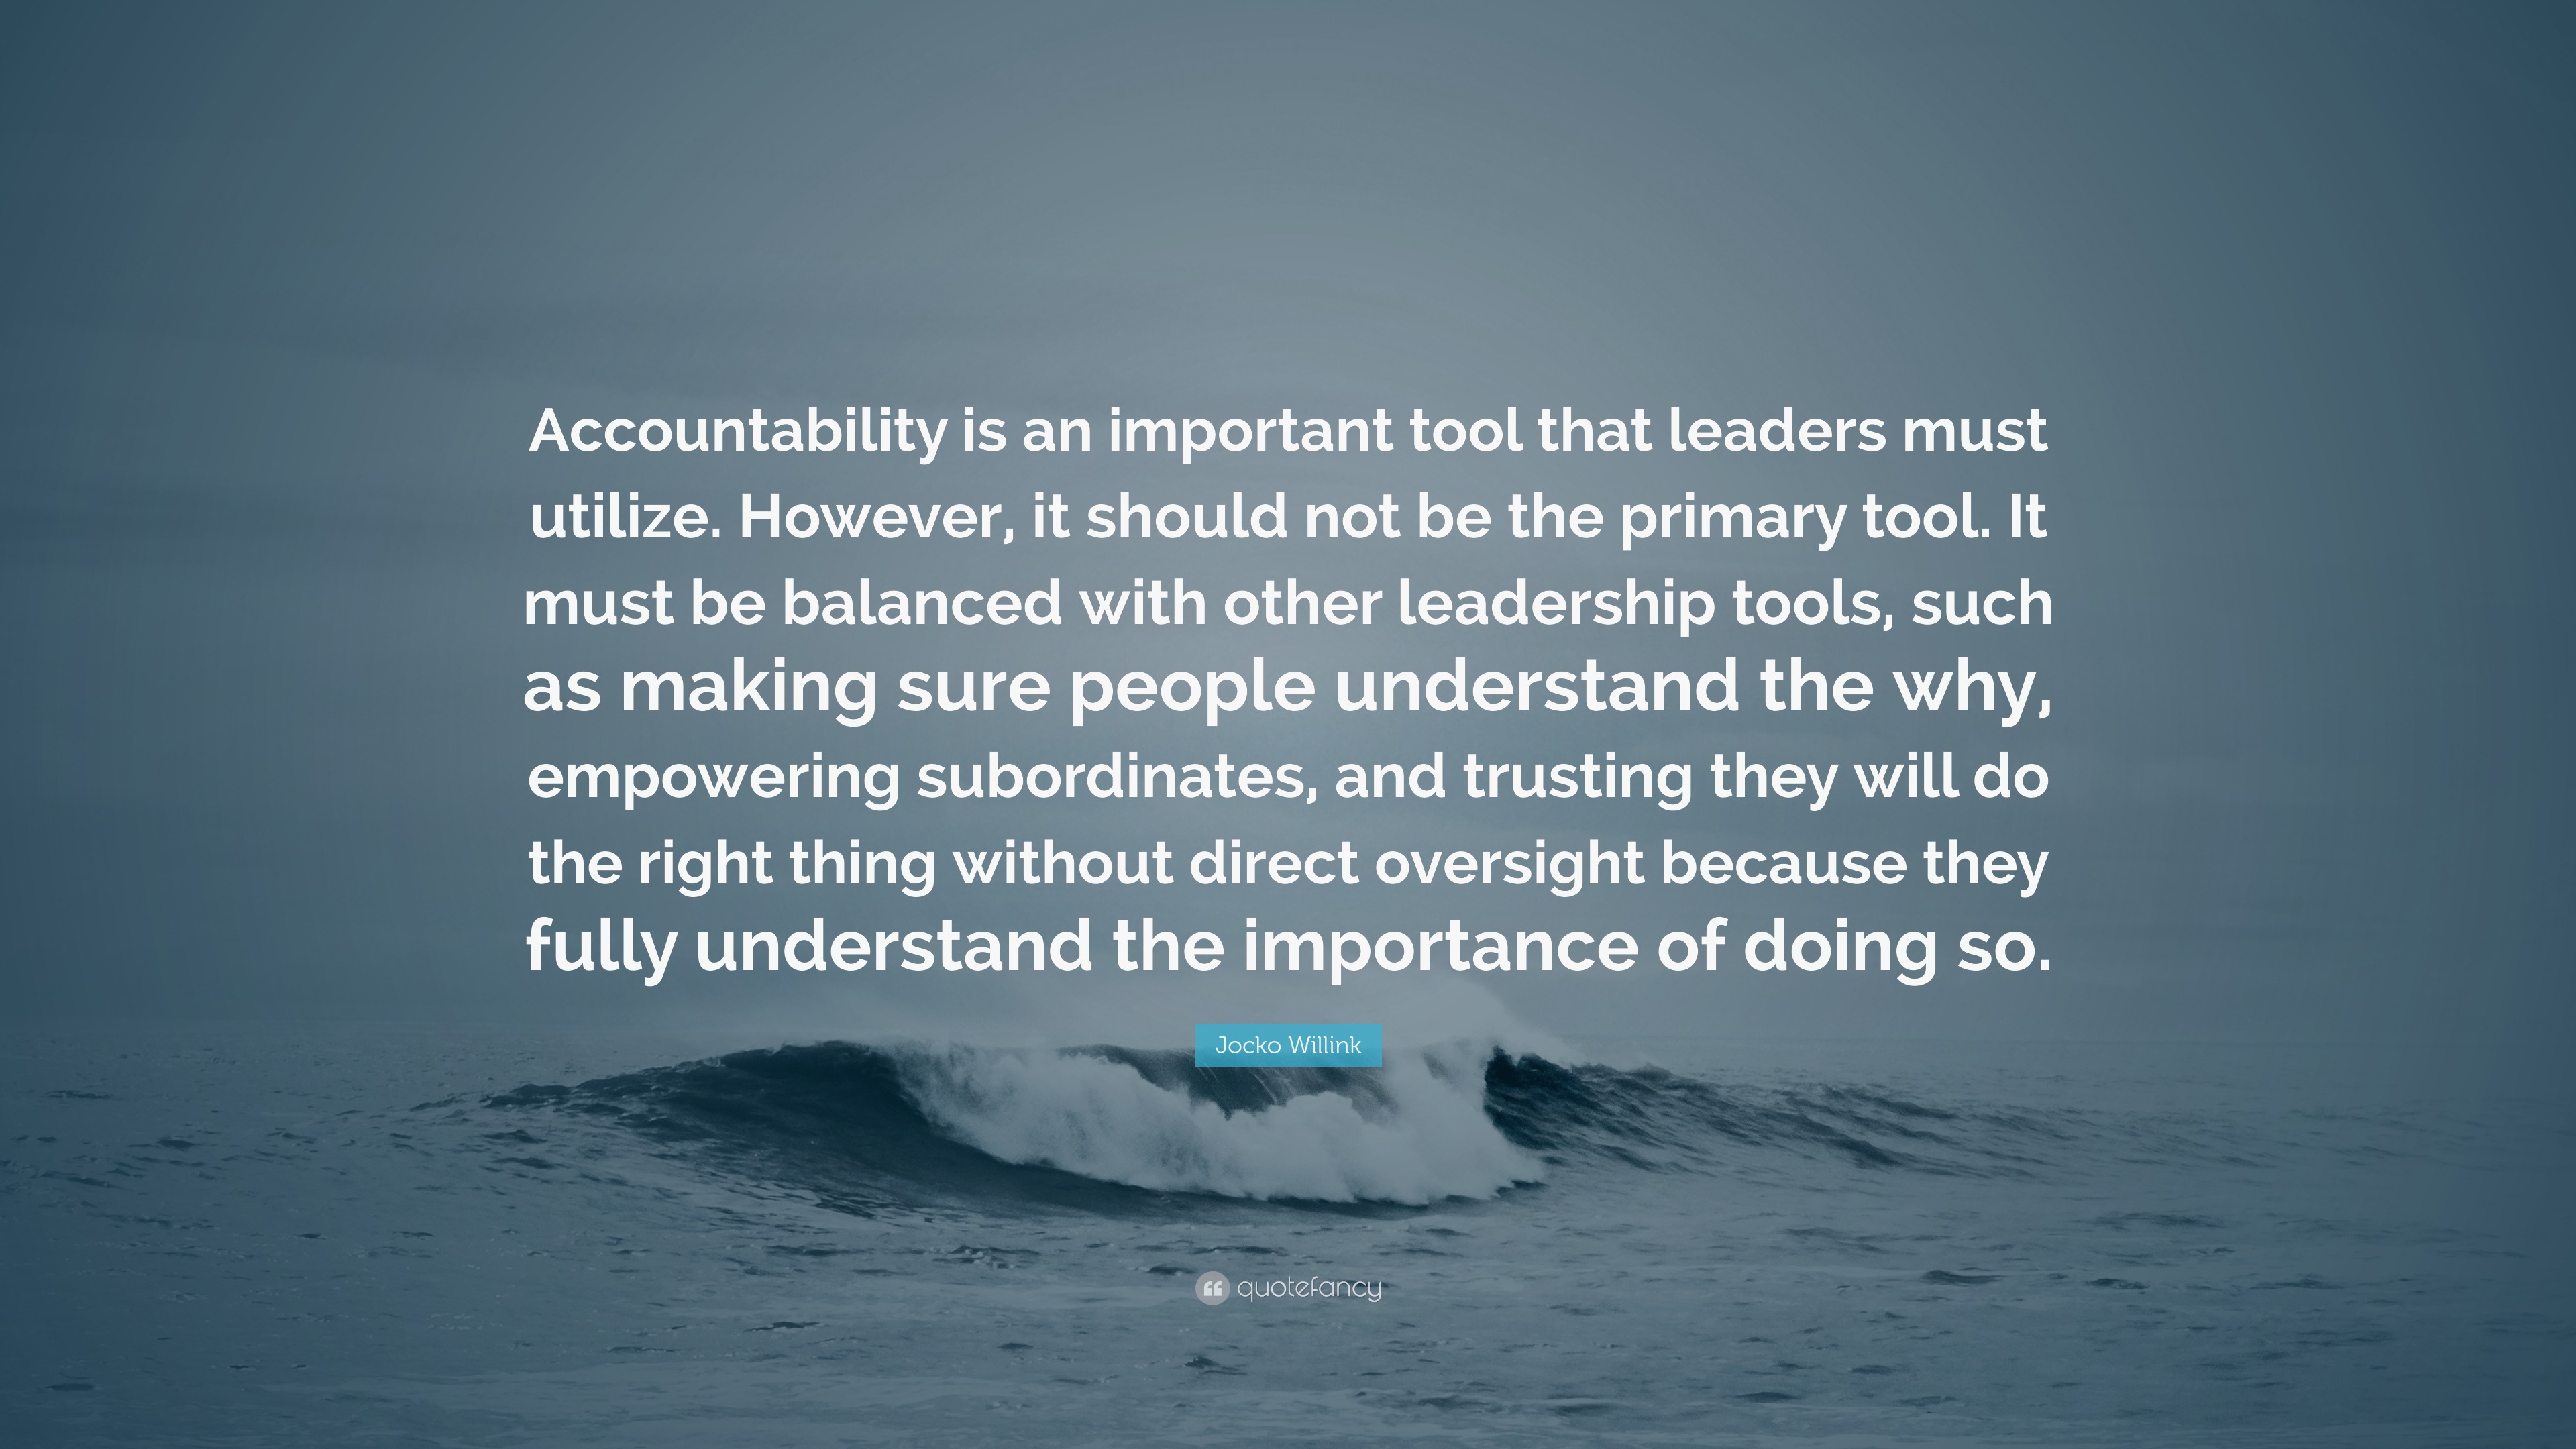 Jocko Willink Quote: “Accountability is an important tool that leaders